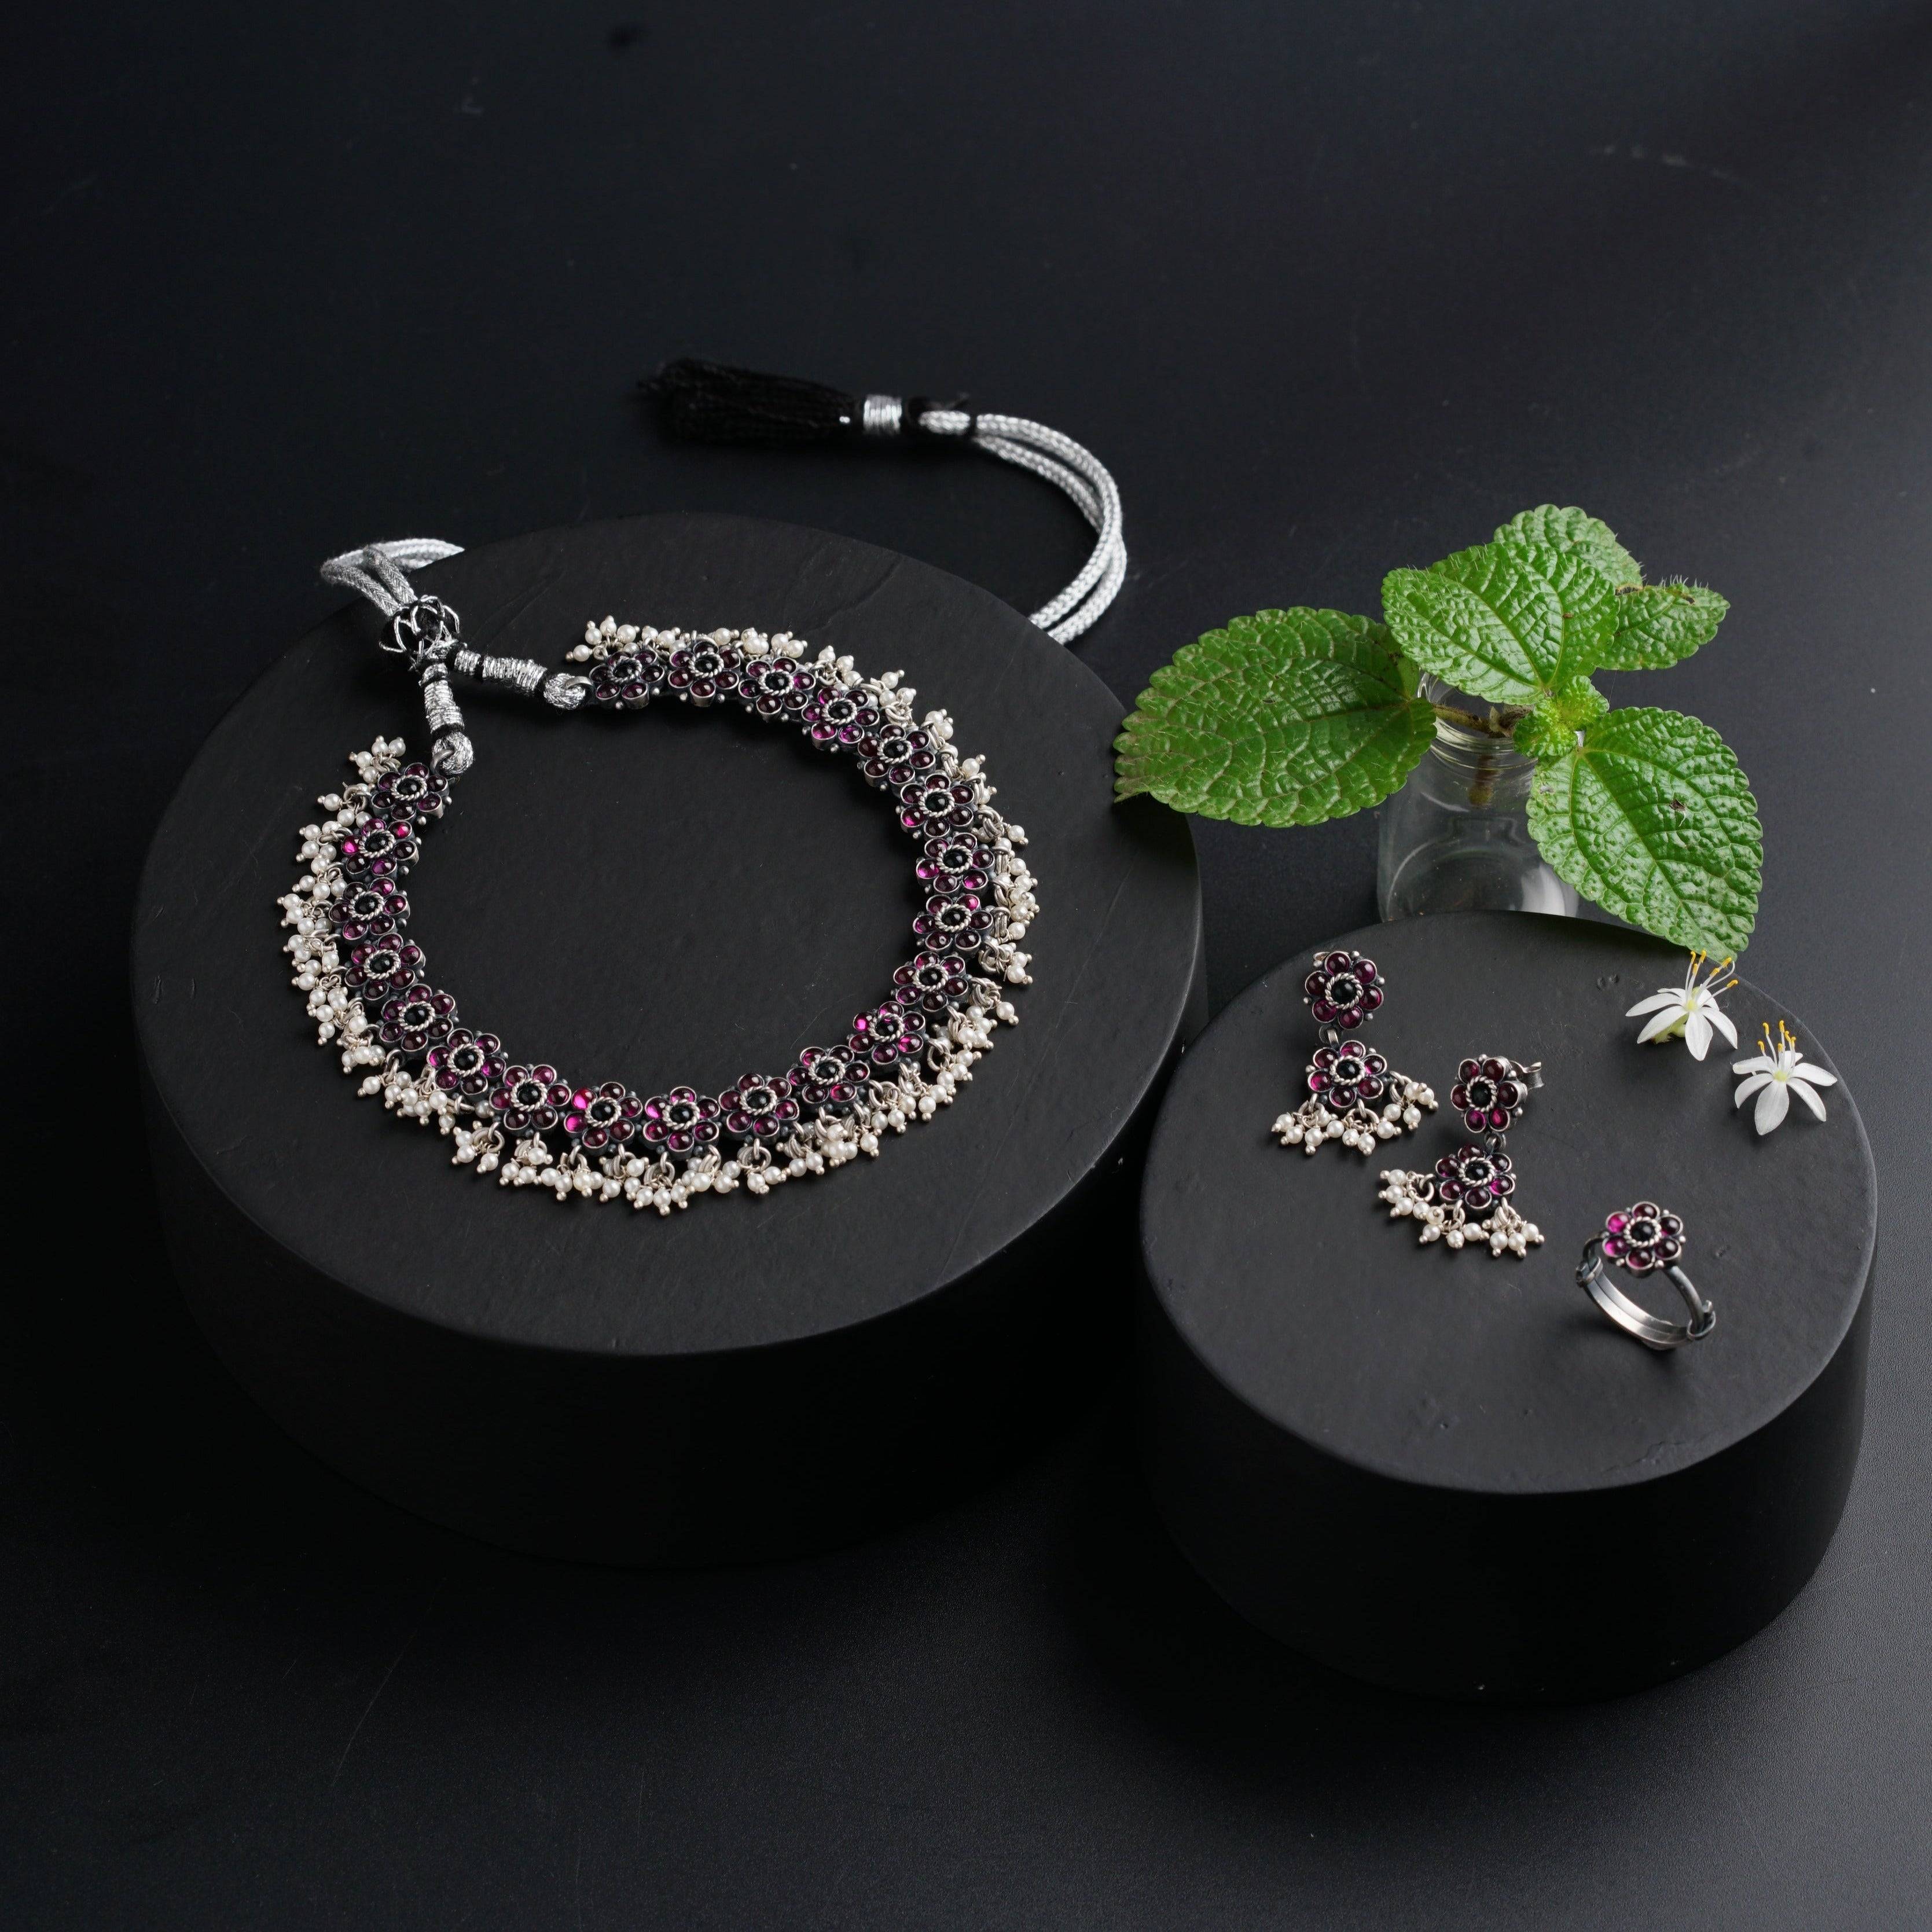 a pair of jewelry sits on a black surface